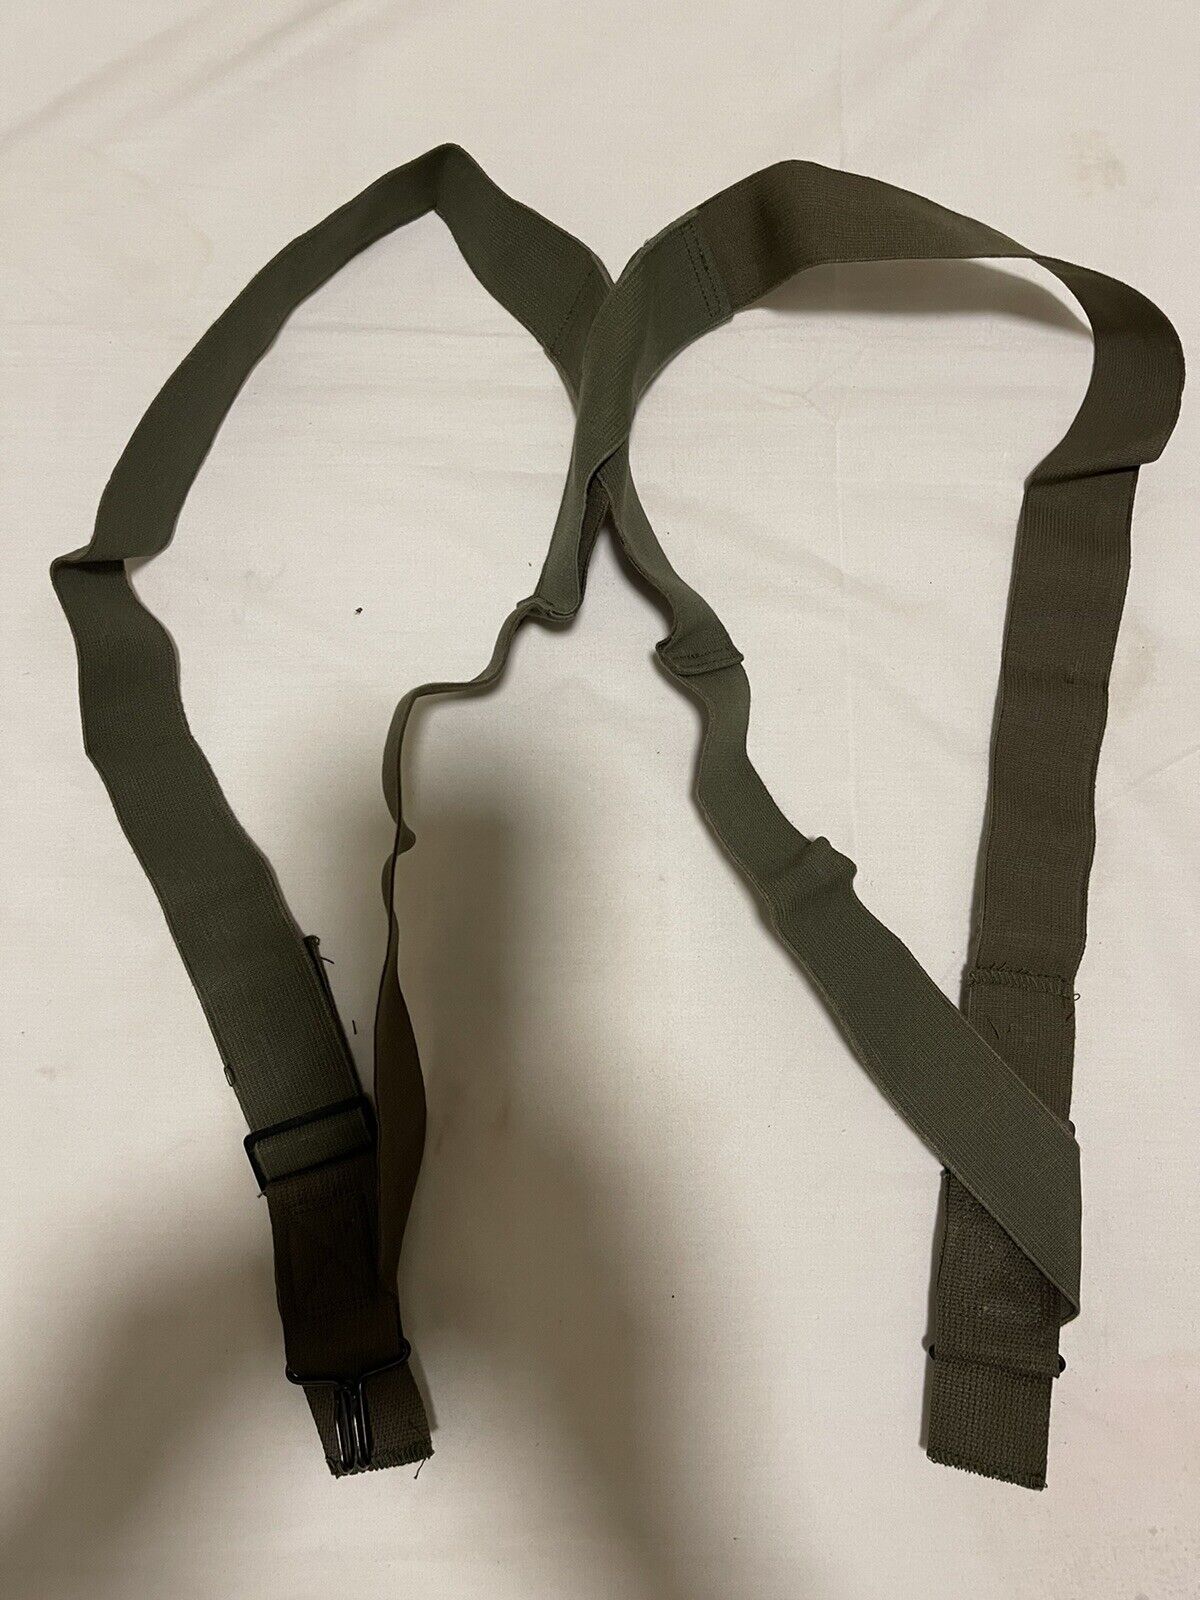 Us Military Suspenders For Od And Camoflauge Field Pants/trousers